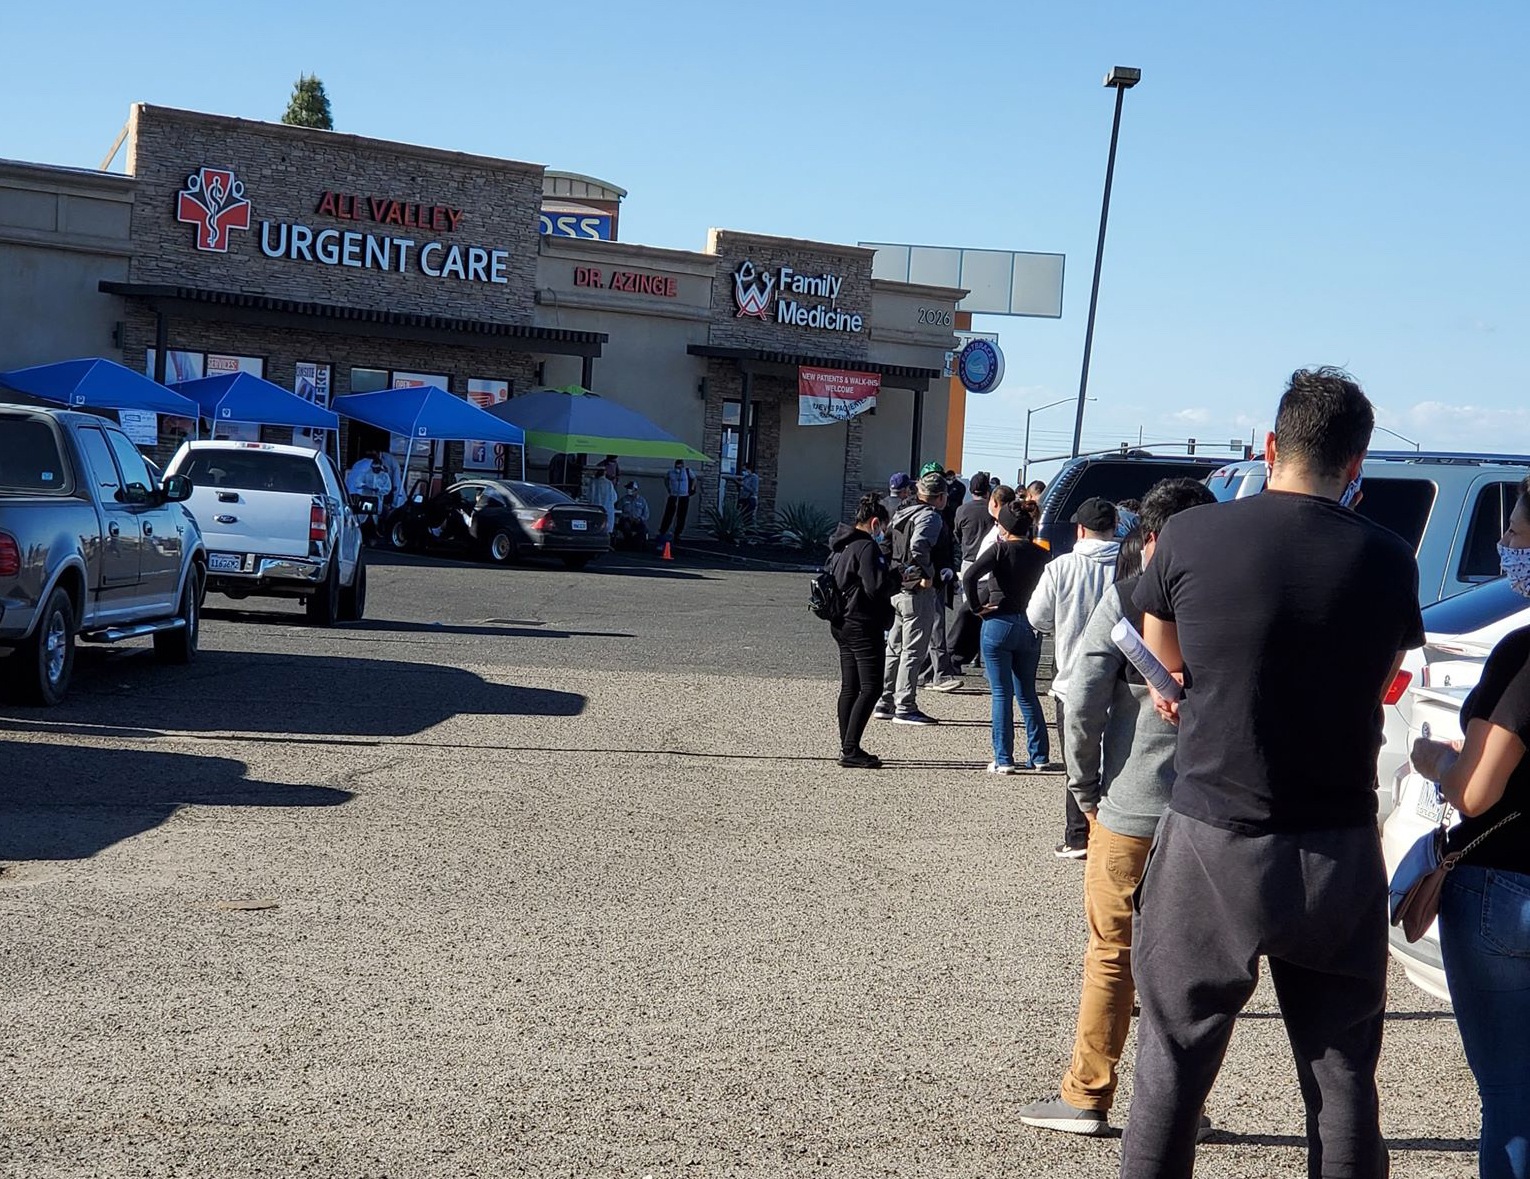 Line forms outside of All Valley Urgent Care for Covid-19 testing. November 2020